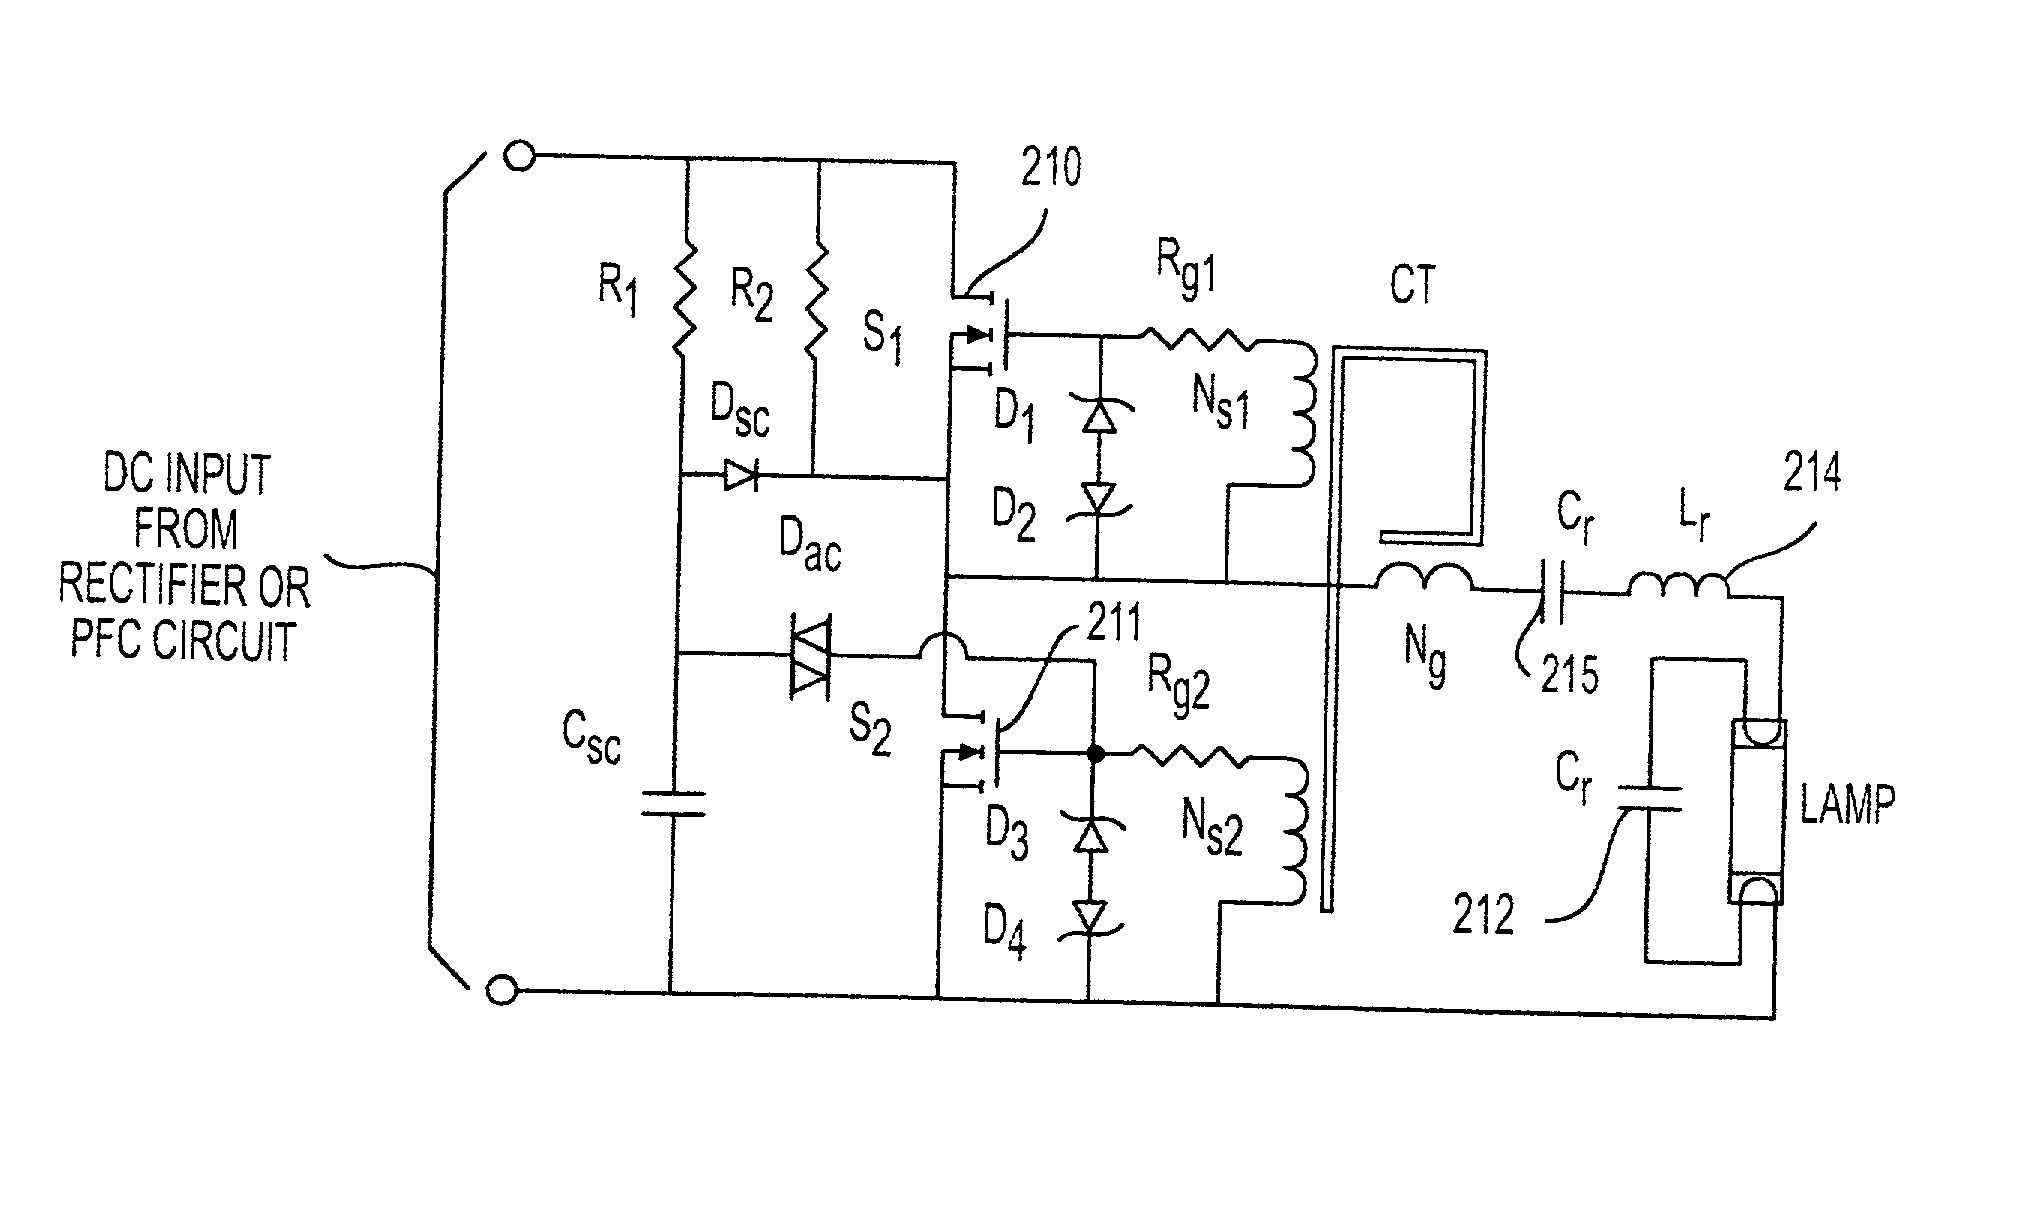 Self-oscillating electronic discharge lamp ballast with dimming control